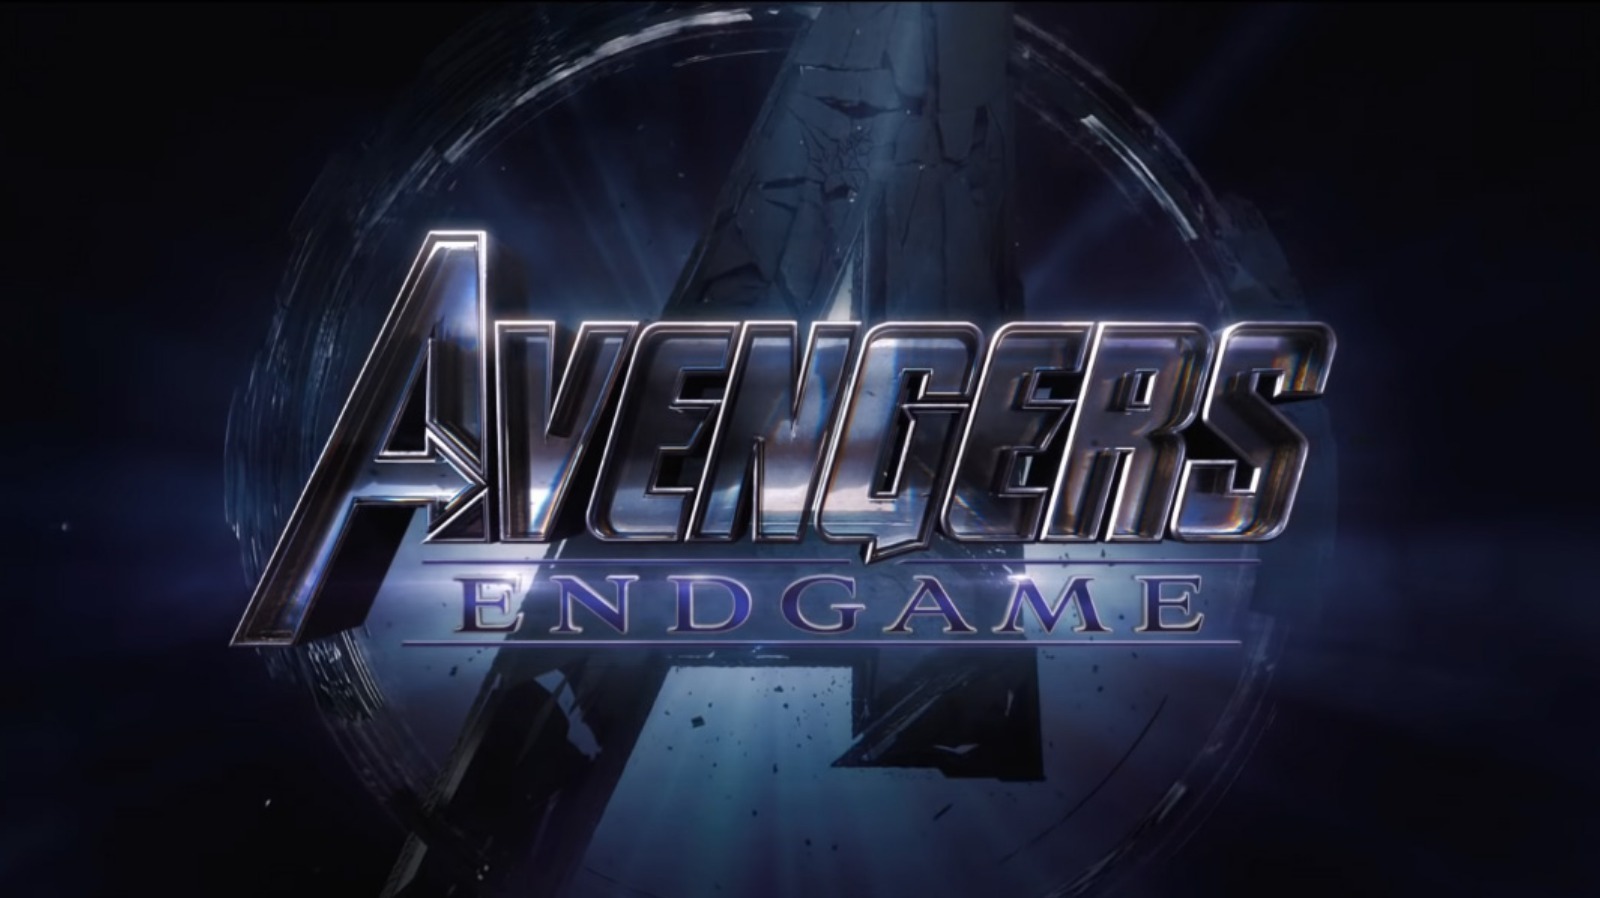 Who Was That Young Man At The 'Avengers: Endgame' Funeral?